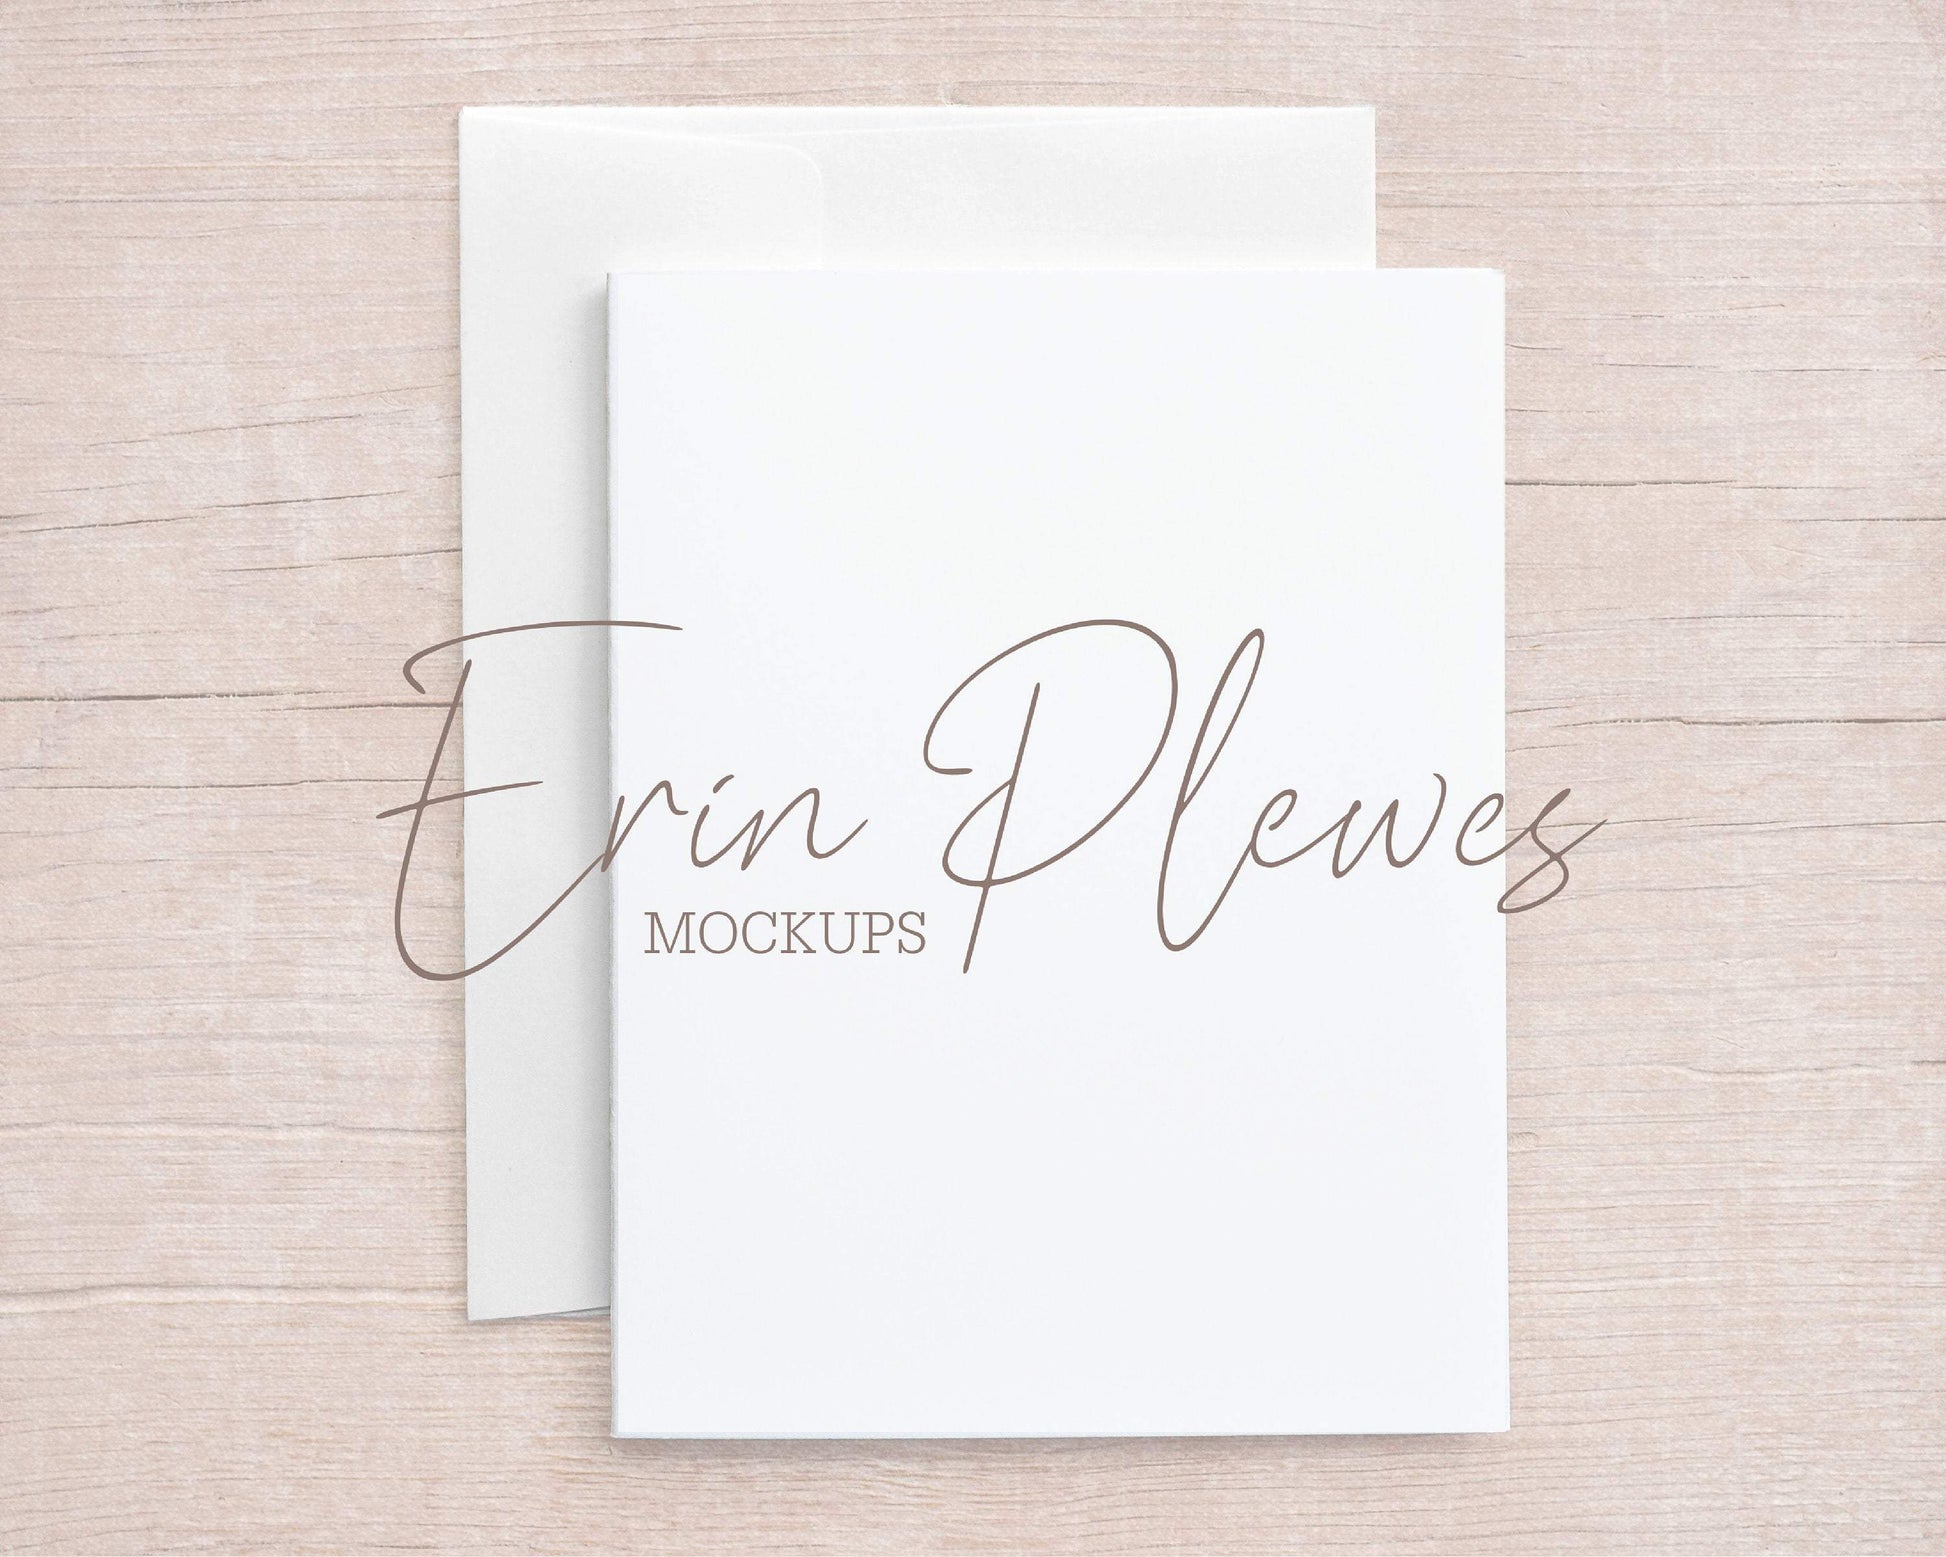 Erin Plewes Mockups A2 Card Mockup with White Envelope on Beige Wood, Thank You Card Mock Up, Invite Flat Lay for Rustic Wedding, Jpeg Instant Digital Download